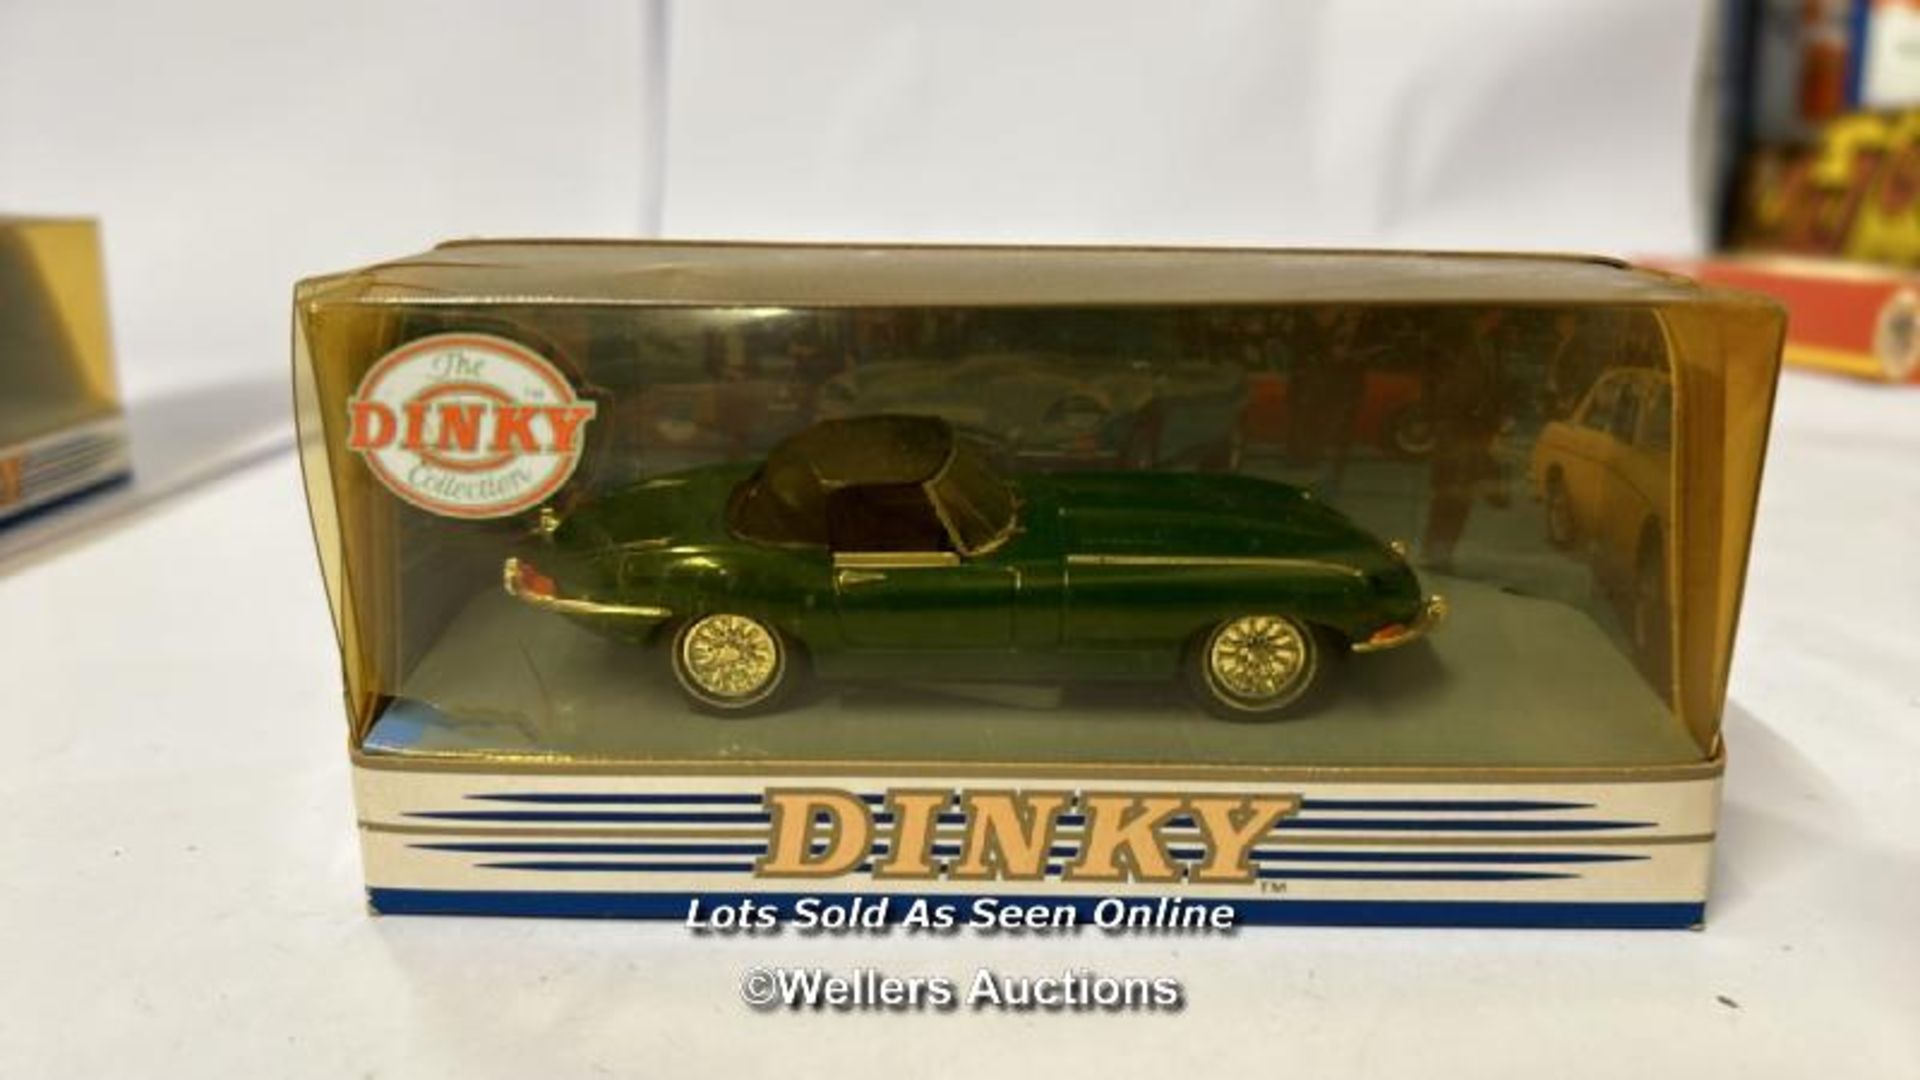 Four Dinky diecast cars and one Vanguards van including 1968 Jaguar E-type and 1973 Ferrari / AN3 - Image 9 of 10